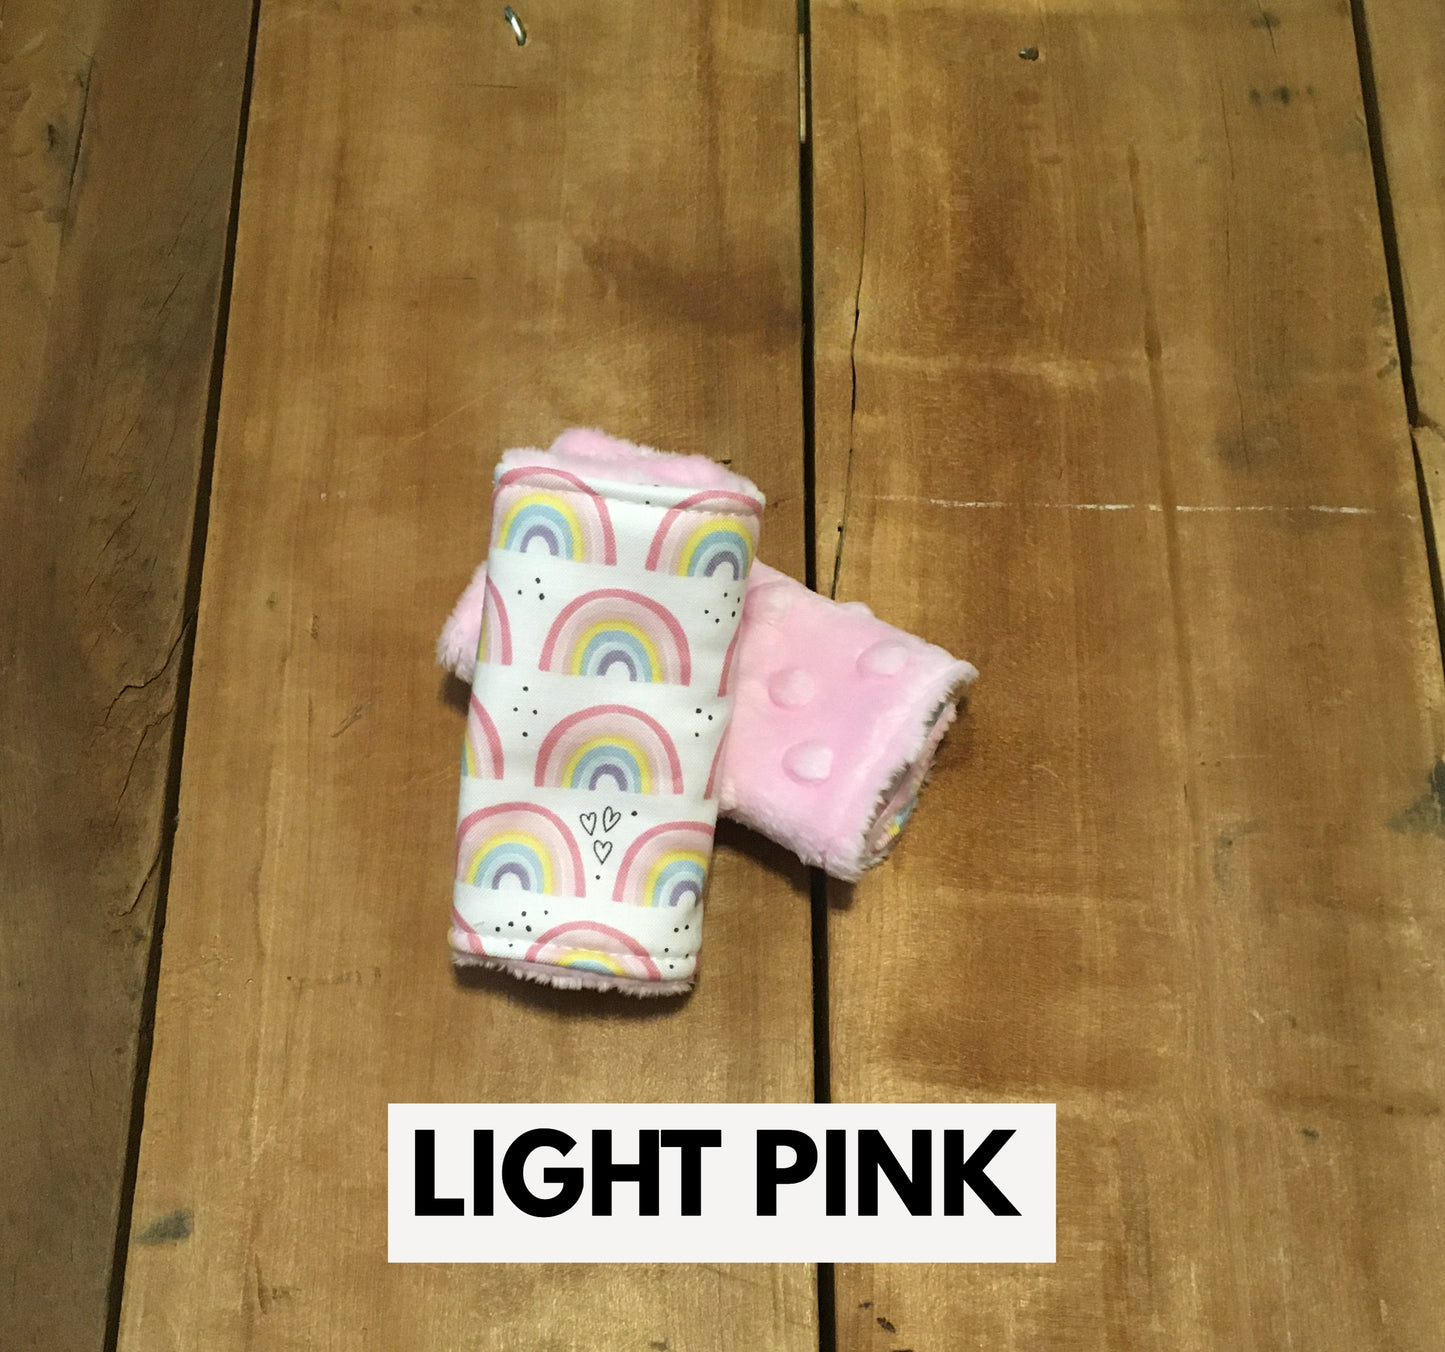 Rainbow car seat strap covers shown in the 4" size with light pink minky back